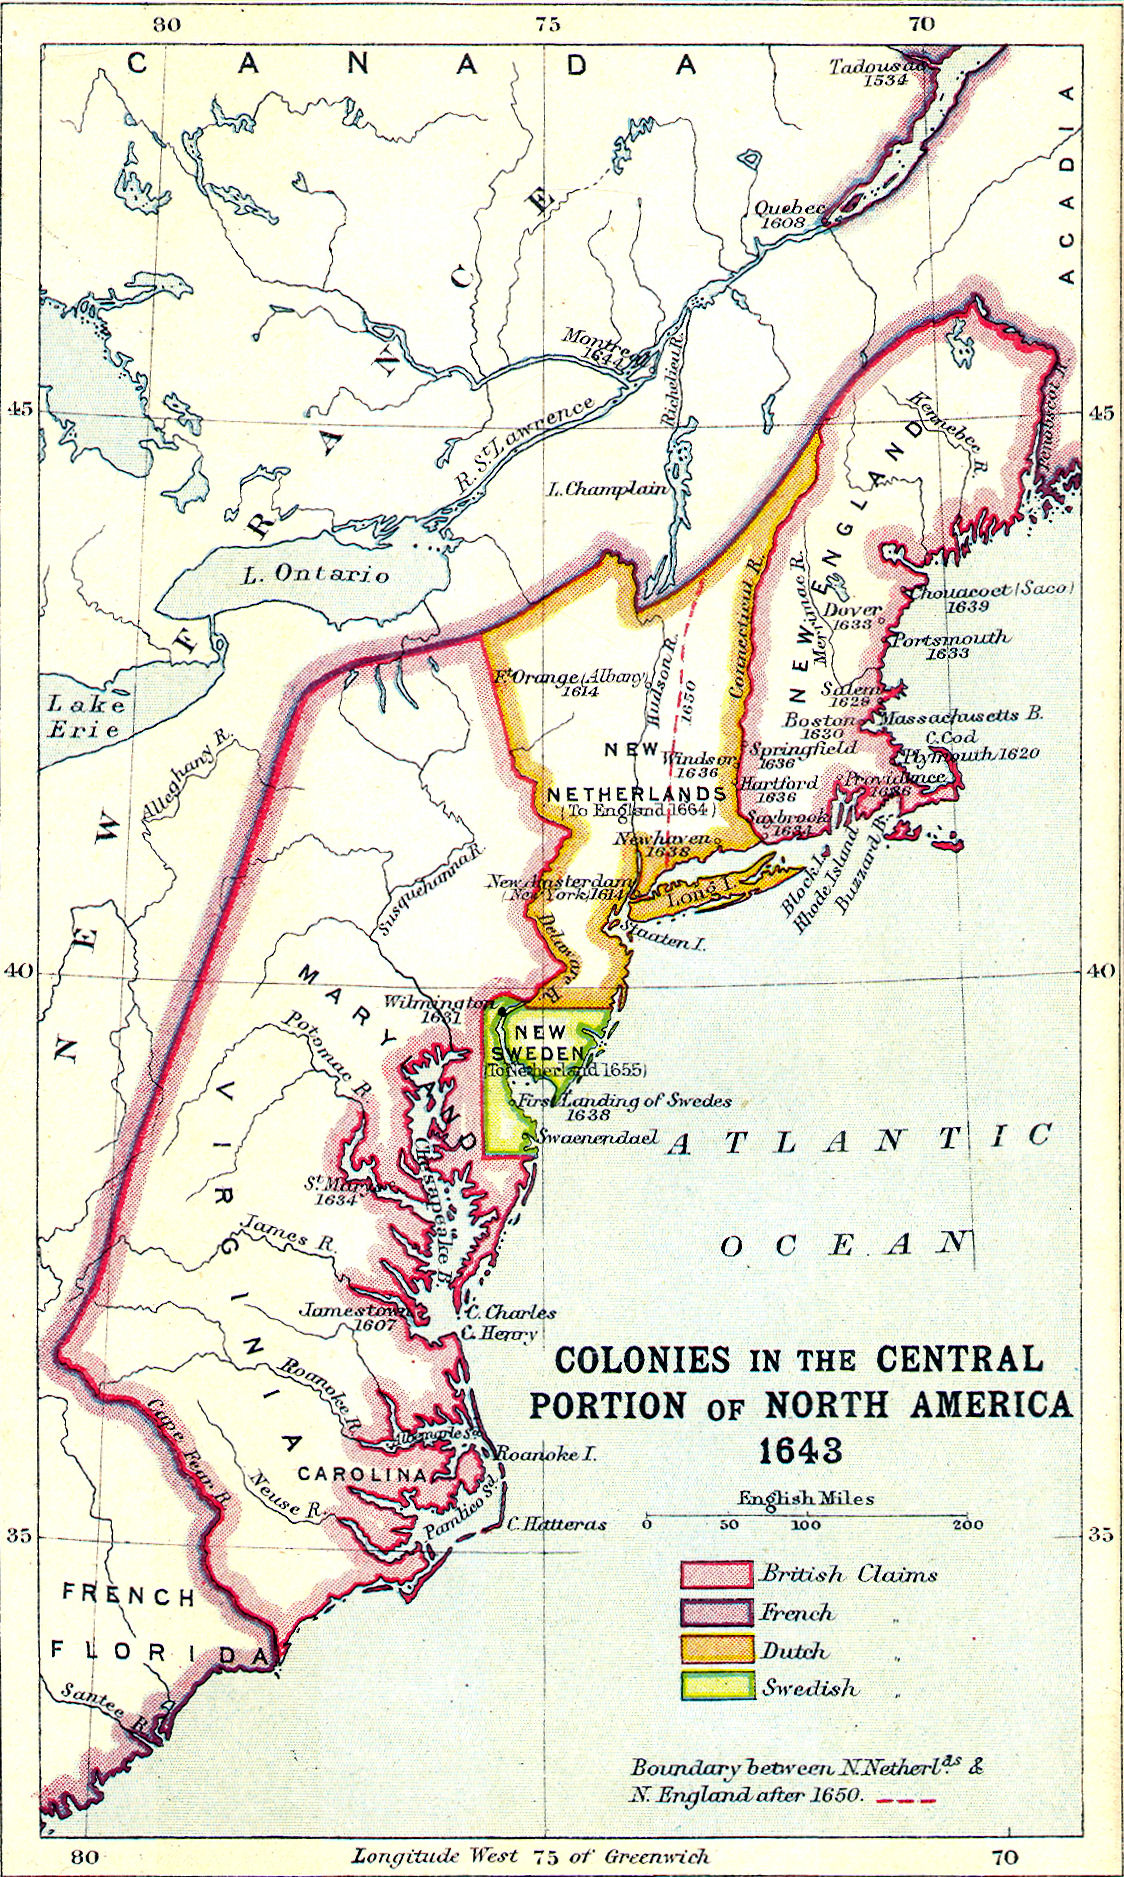 The English American Colonies